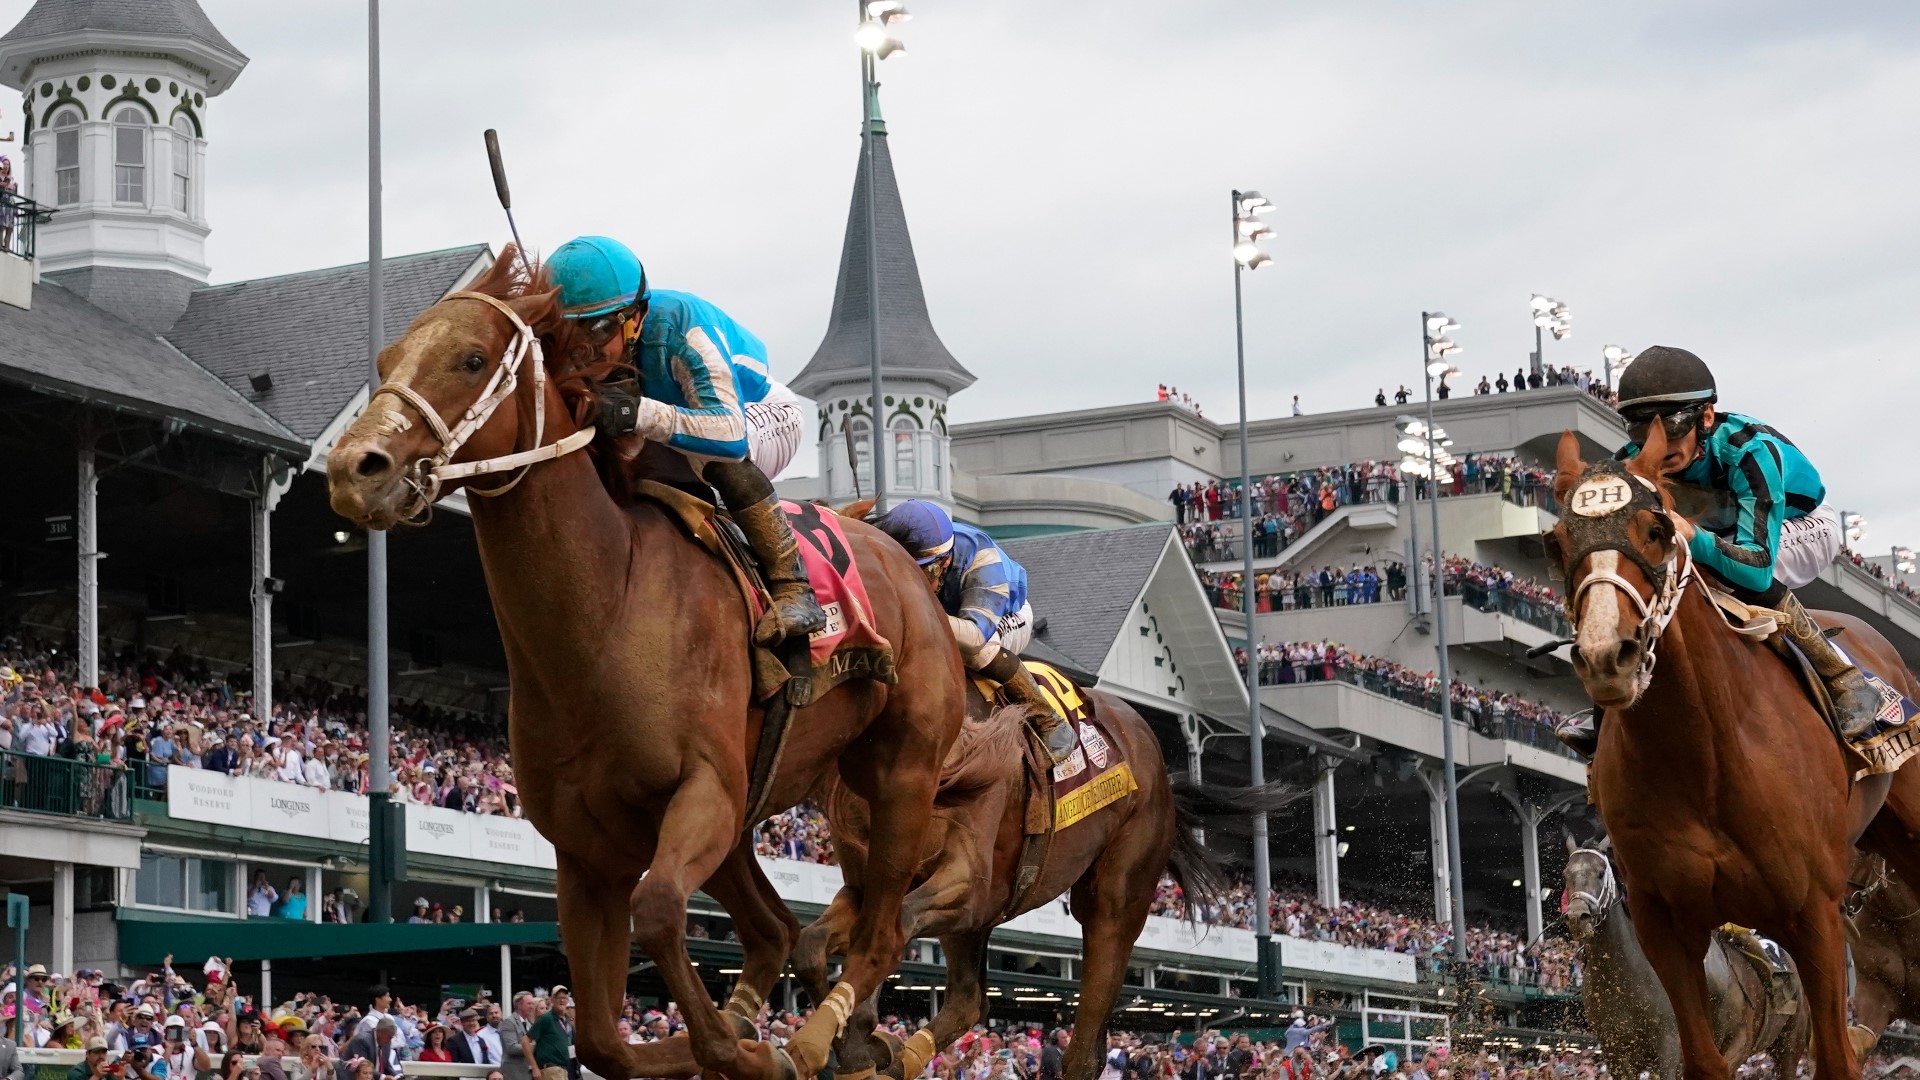 Thursday, Jan. 25 marks 100 days until the 150th Kentucky Derby.